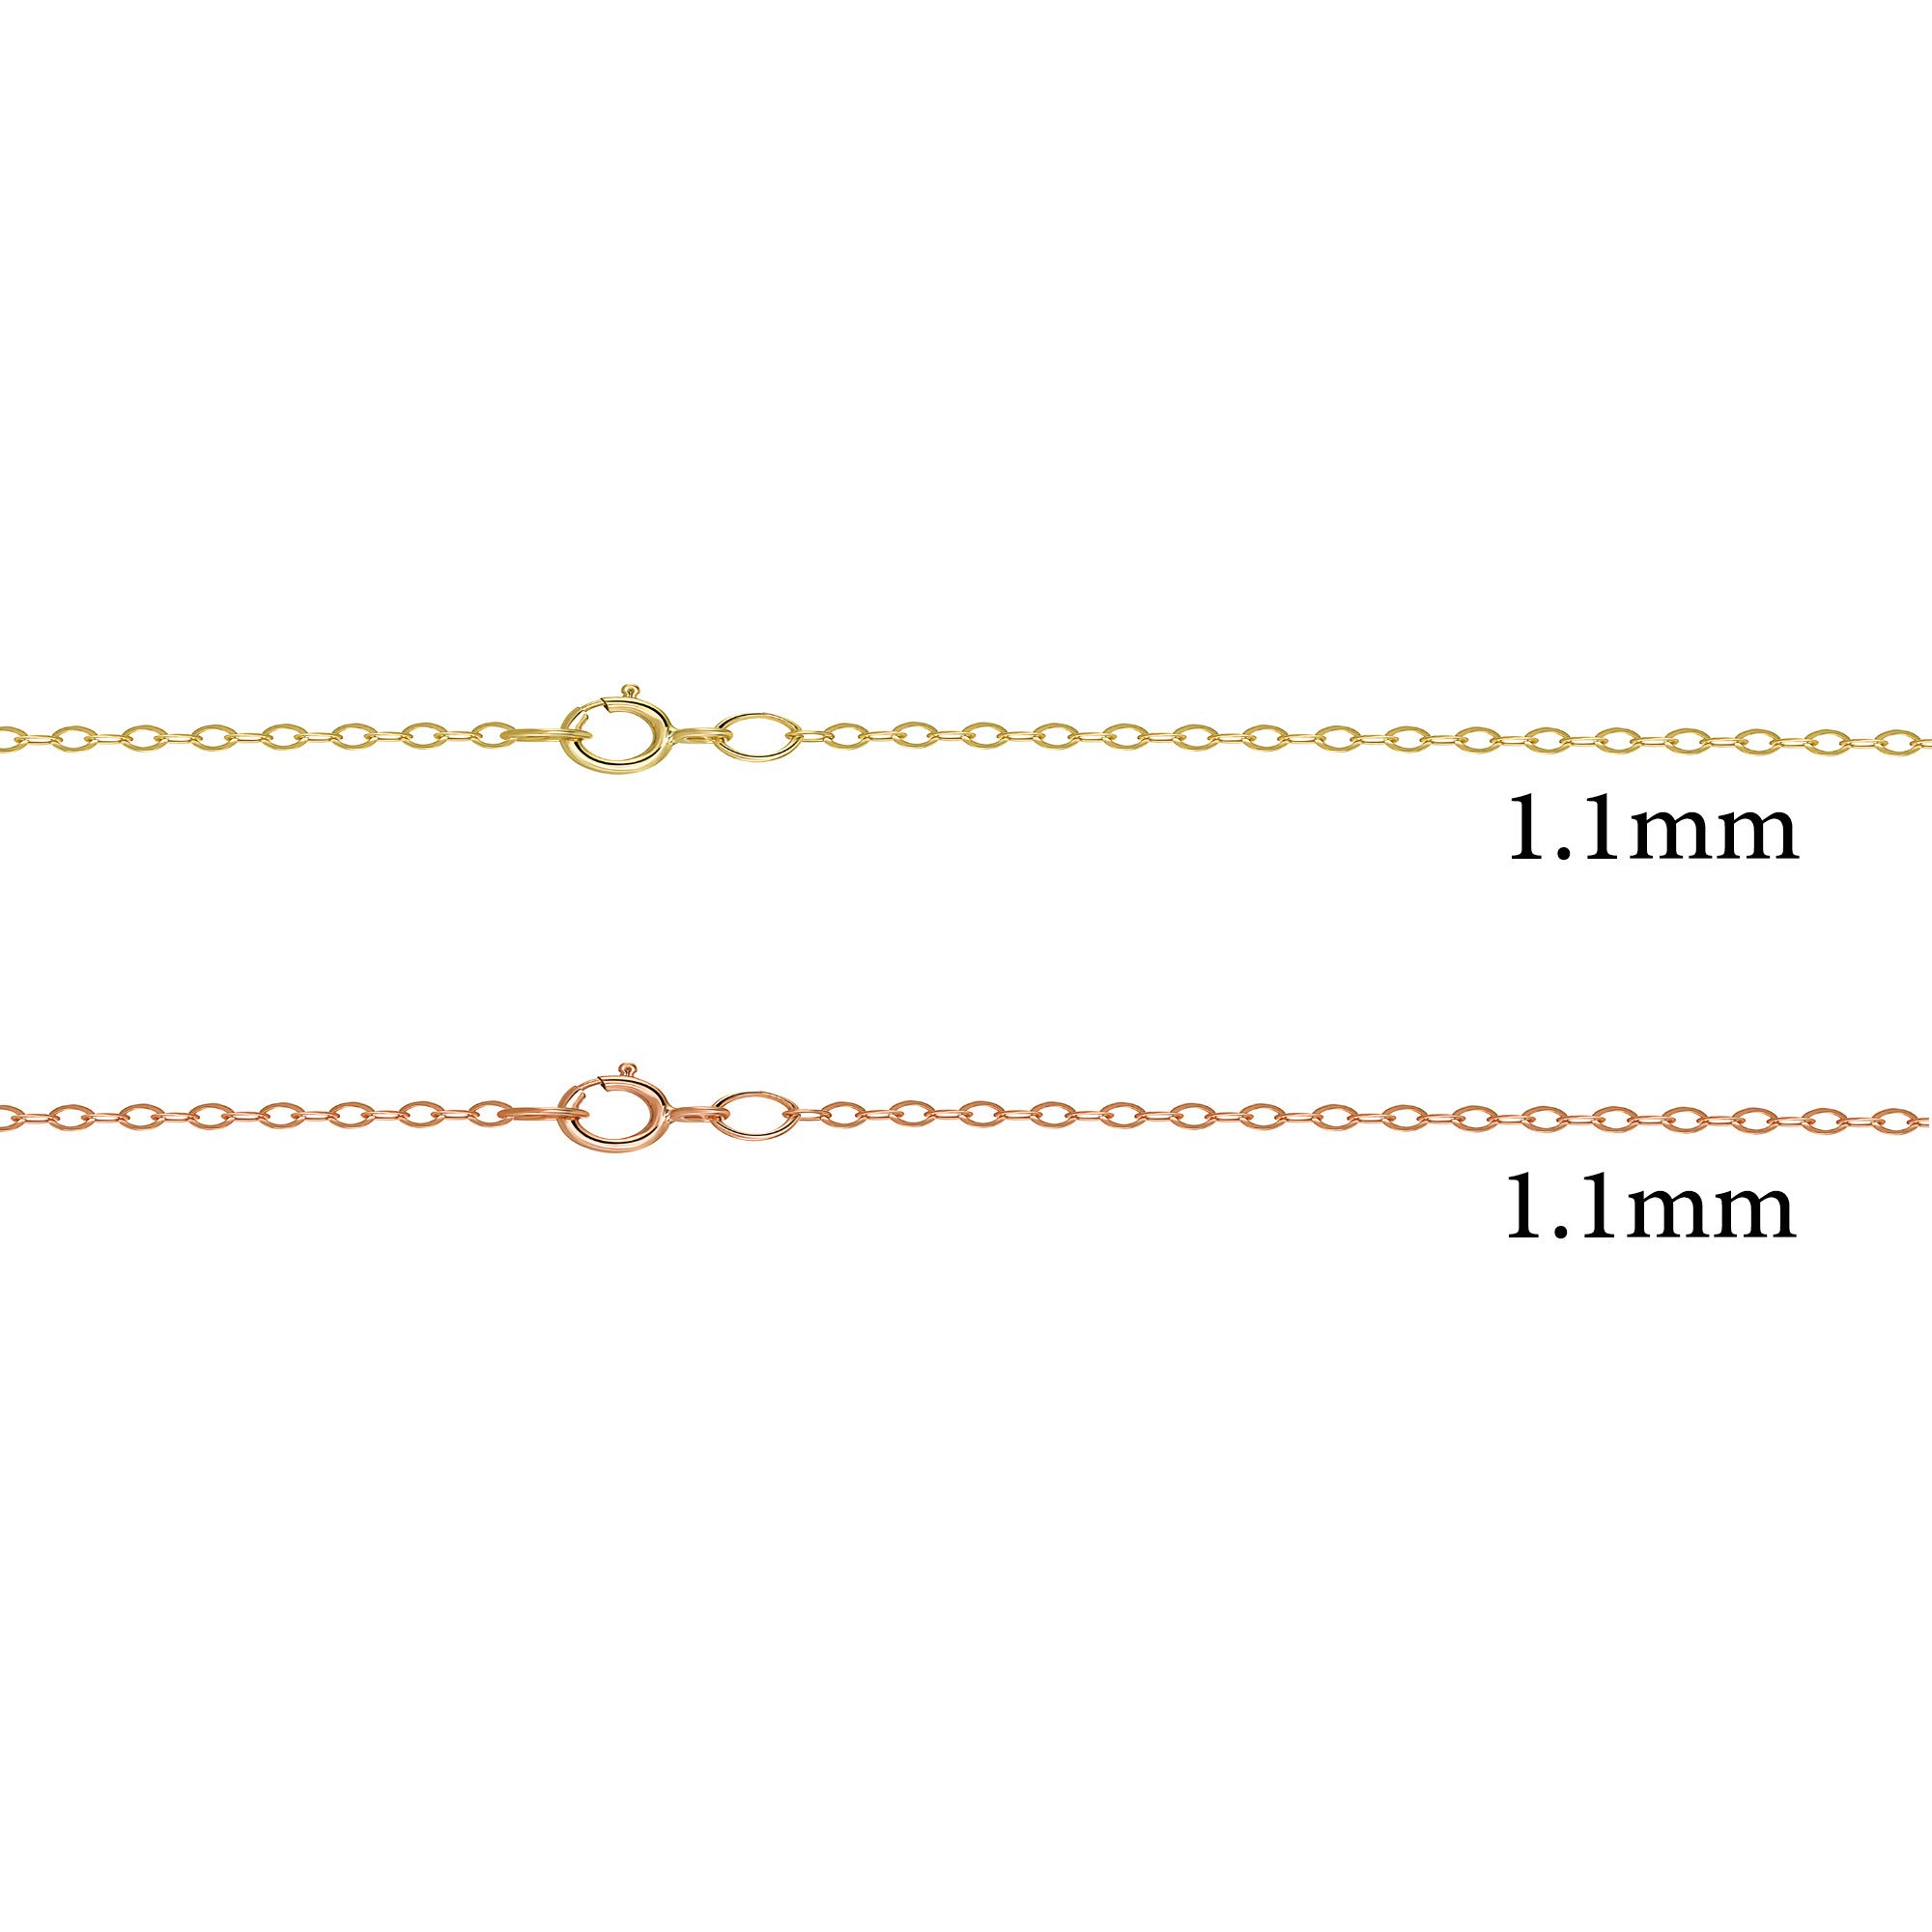 TOUSIATTAR 14k Rose Gold Filled Cable Chain Necklace Pendant 16-18 Inches 1.1 MM Gauge 18